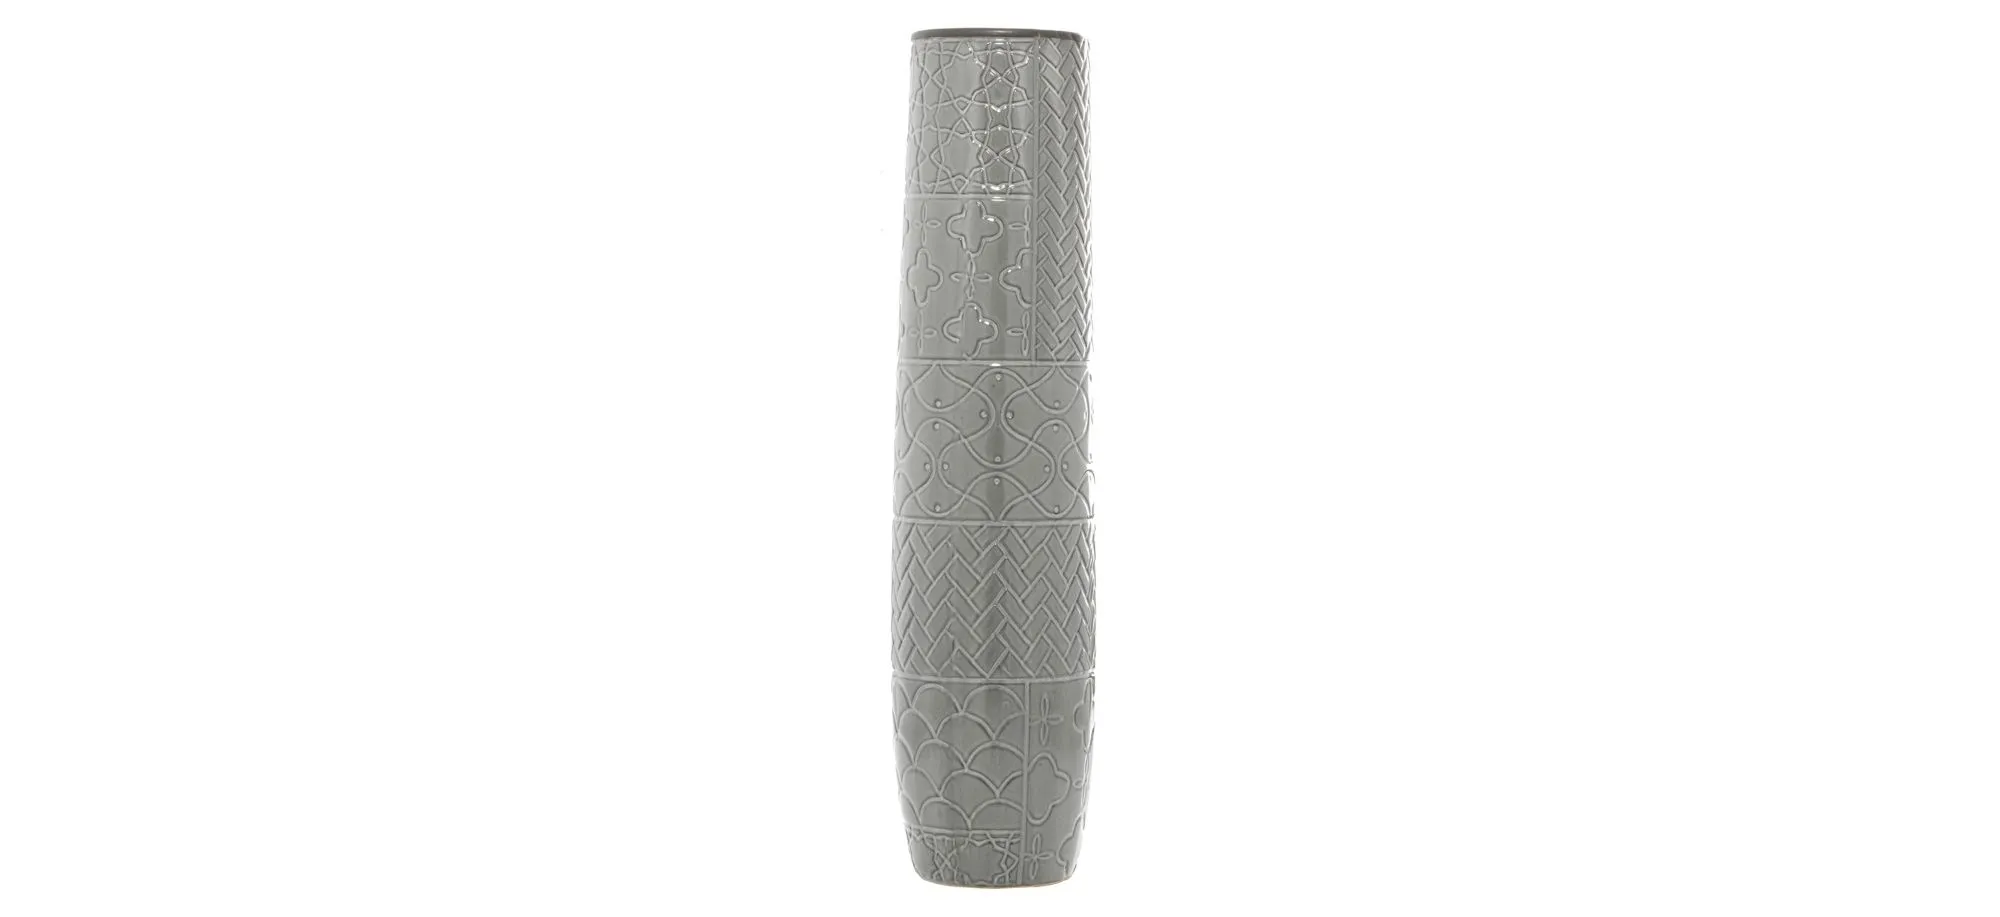 Ivy Collection Ditt Vase in Gray by UMA Enterprises